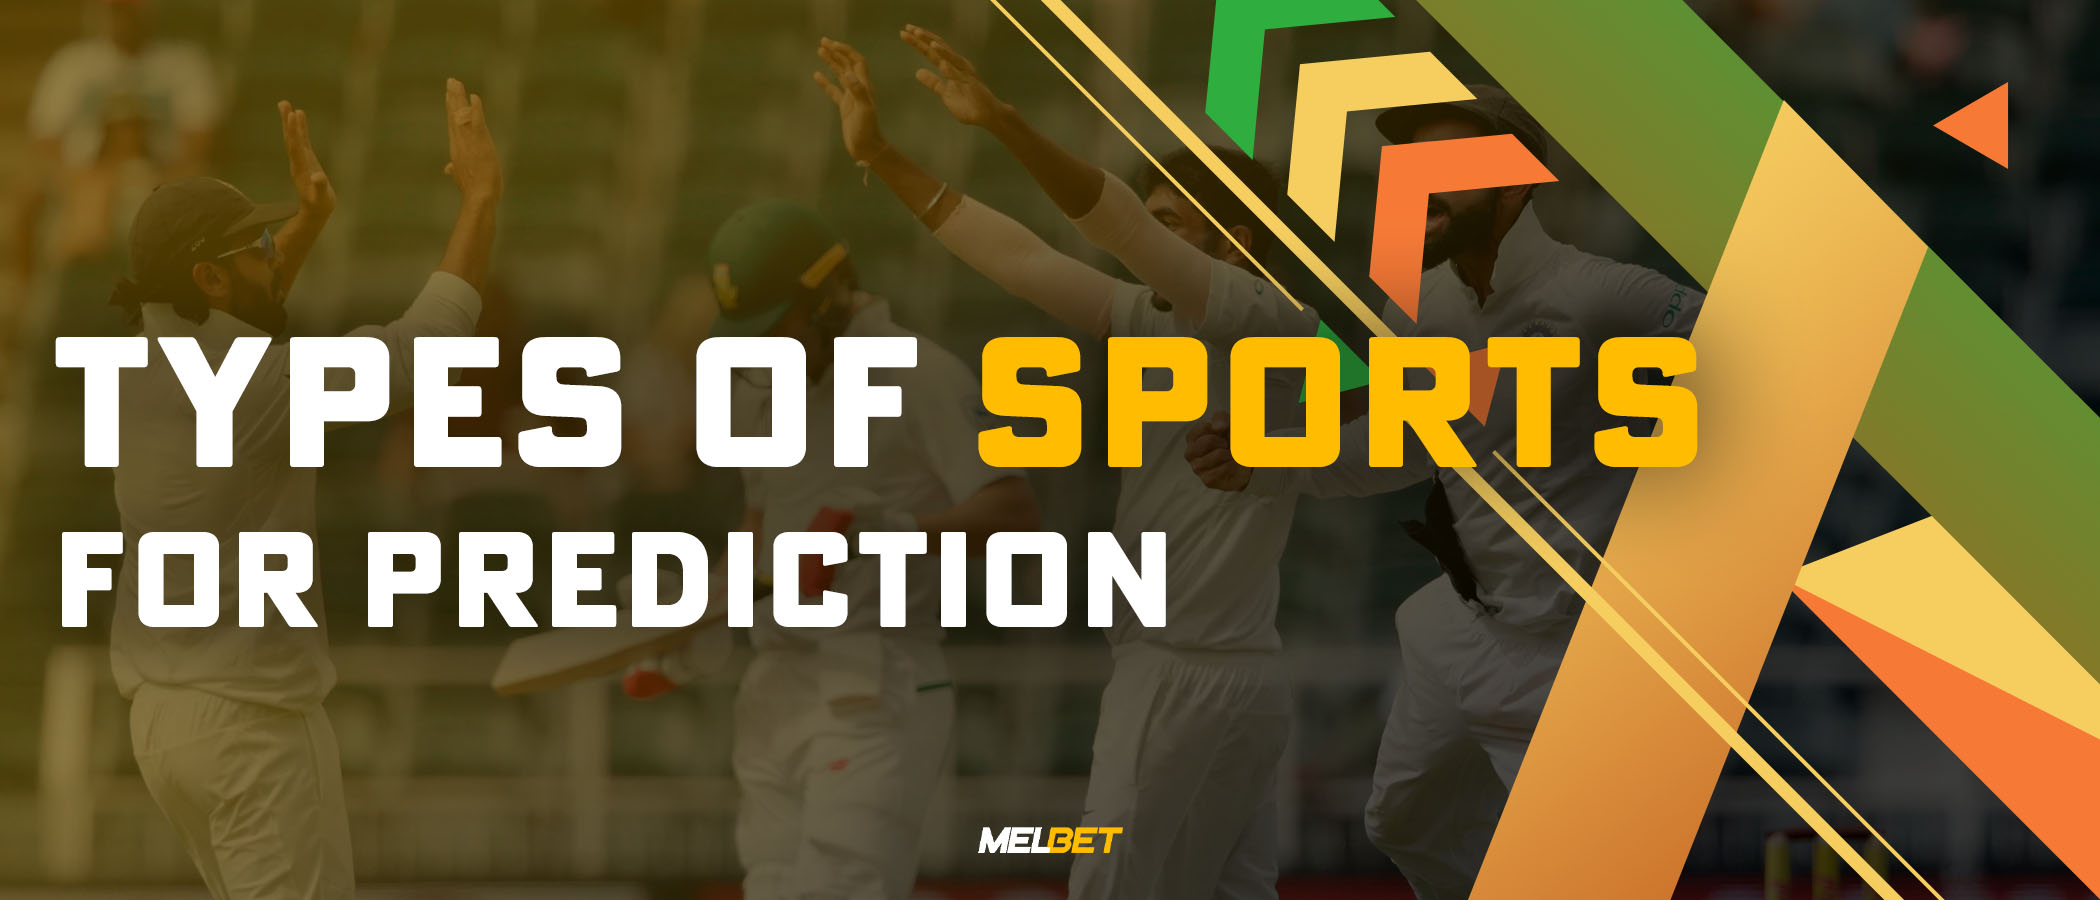 What types of sports do you have to predict